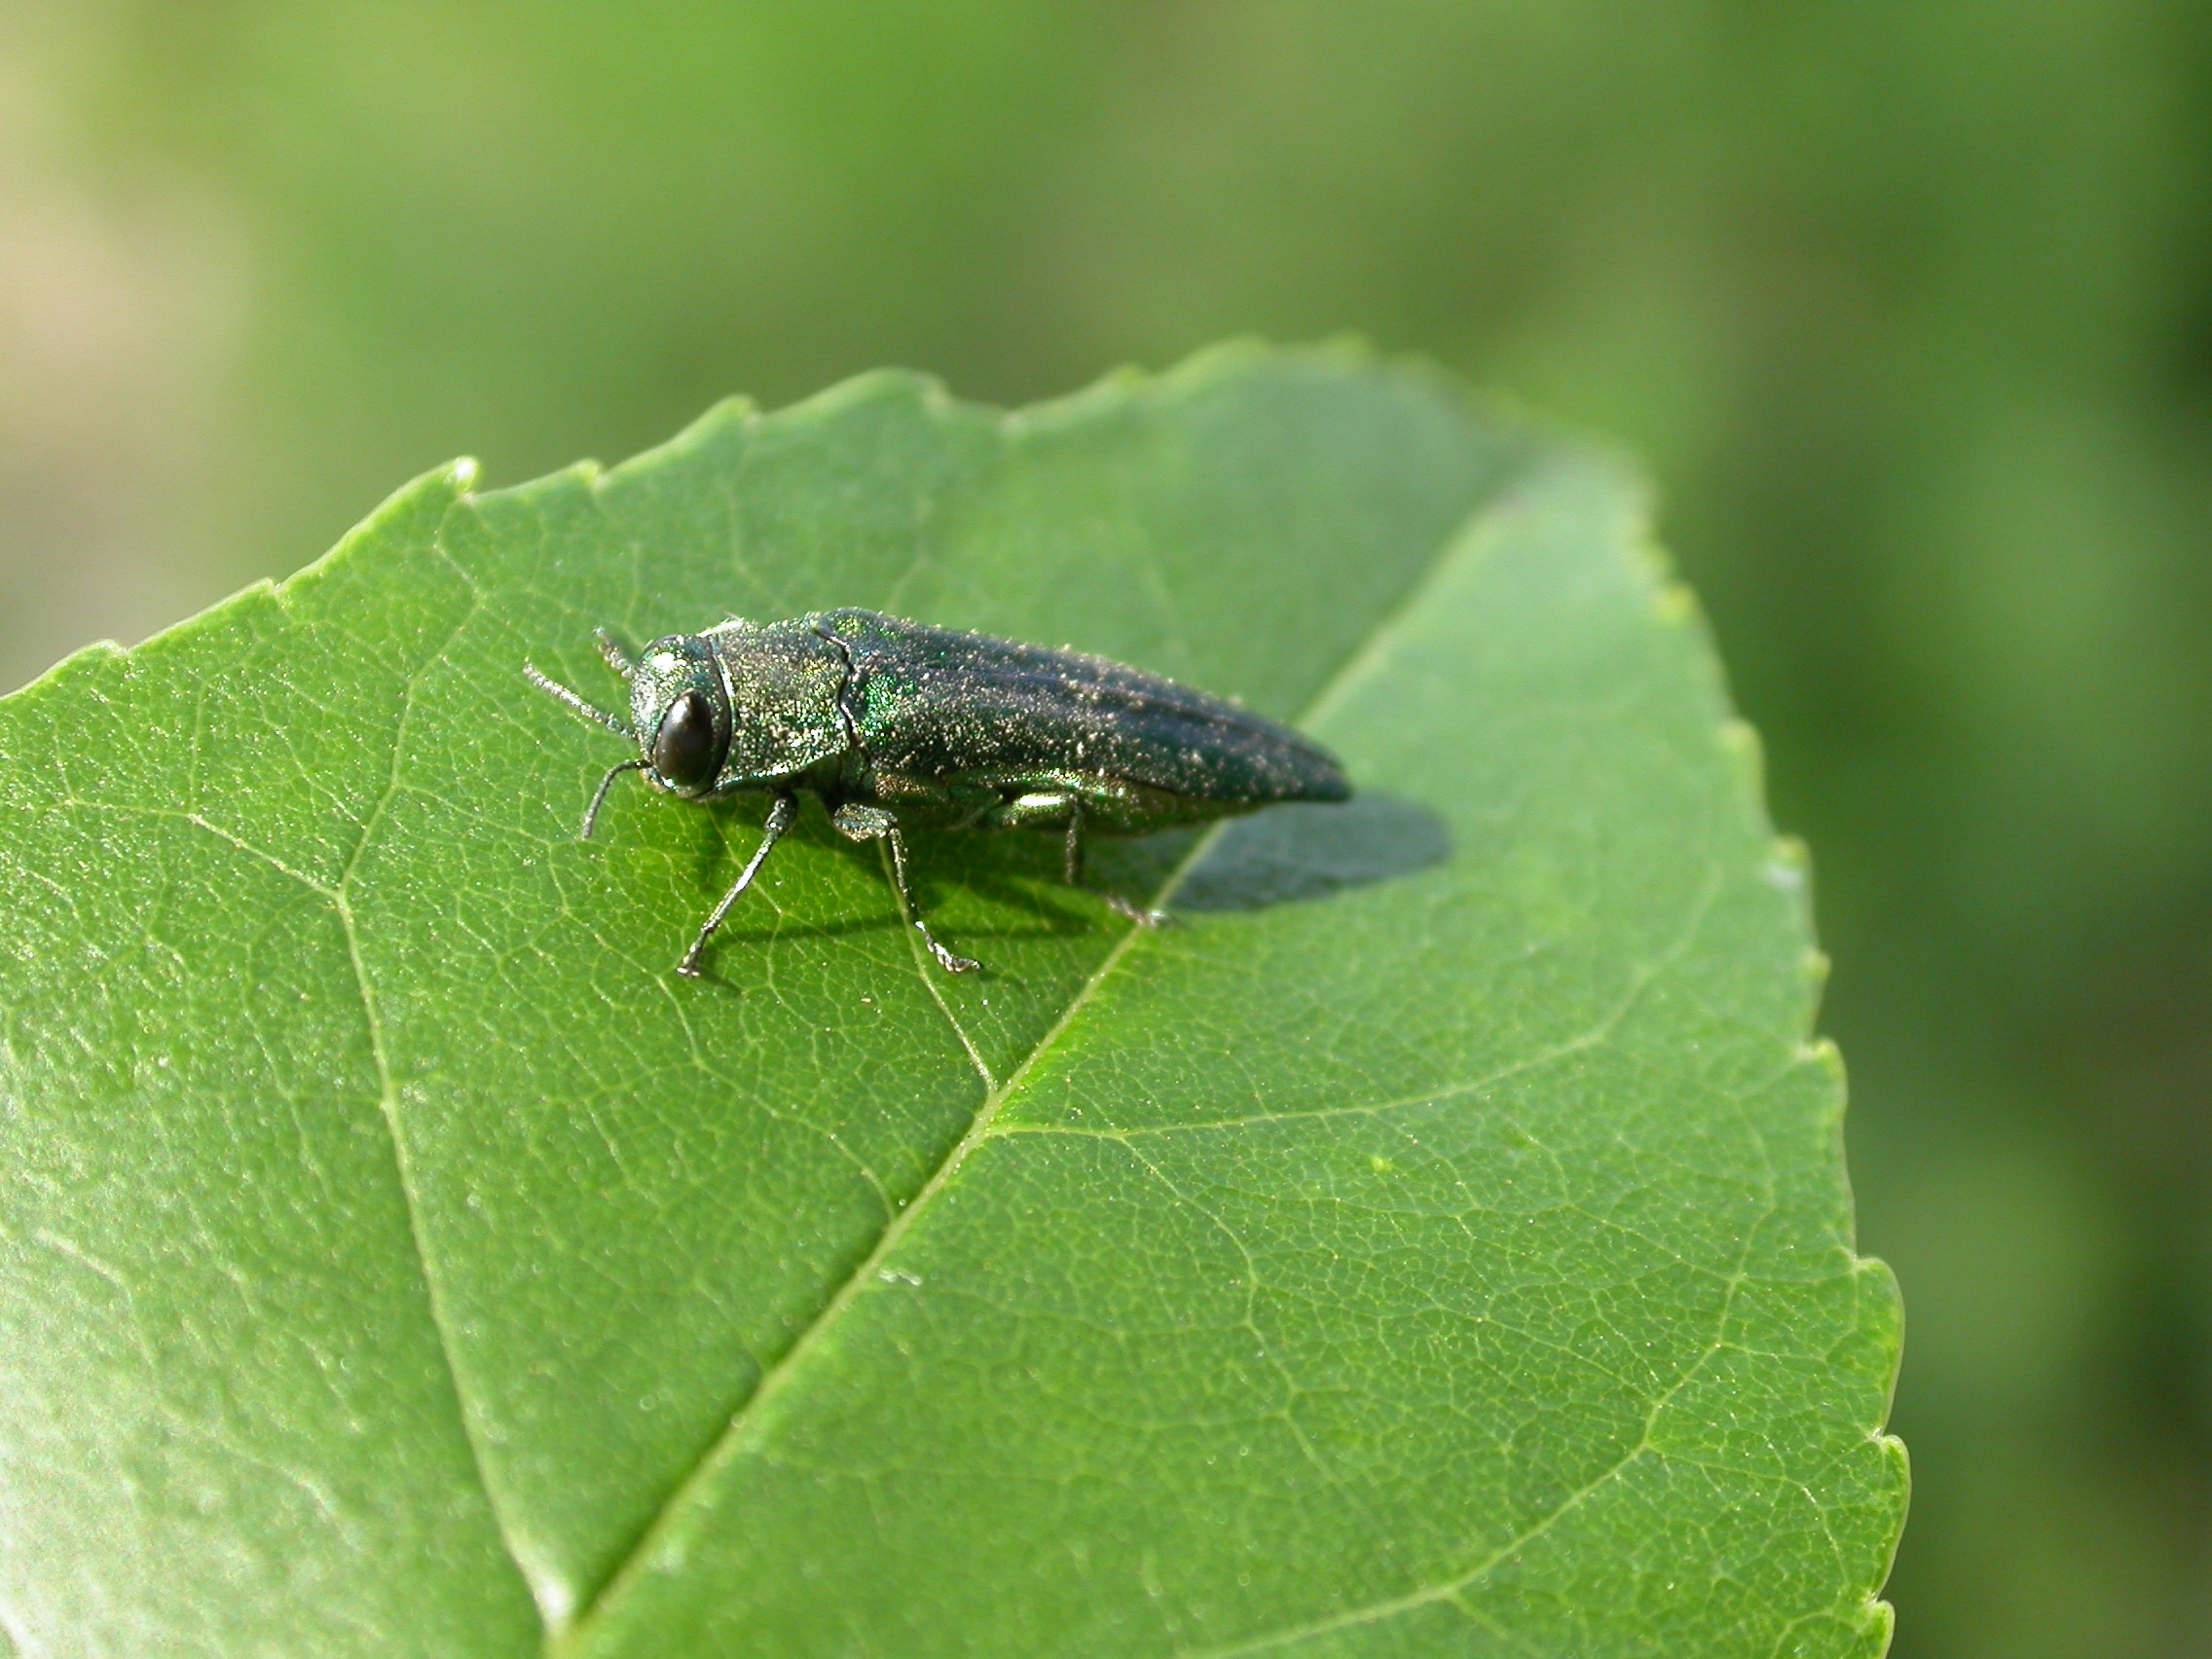 Small, green, fly-like bug on a green leaf